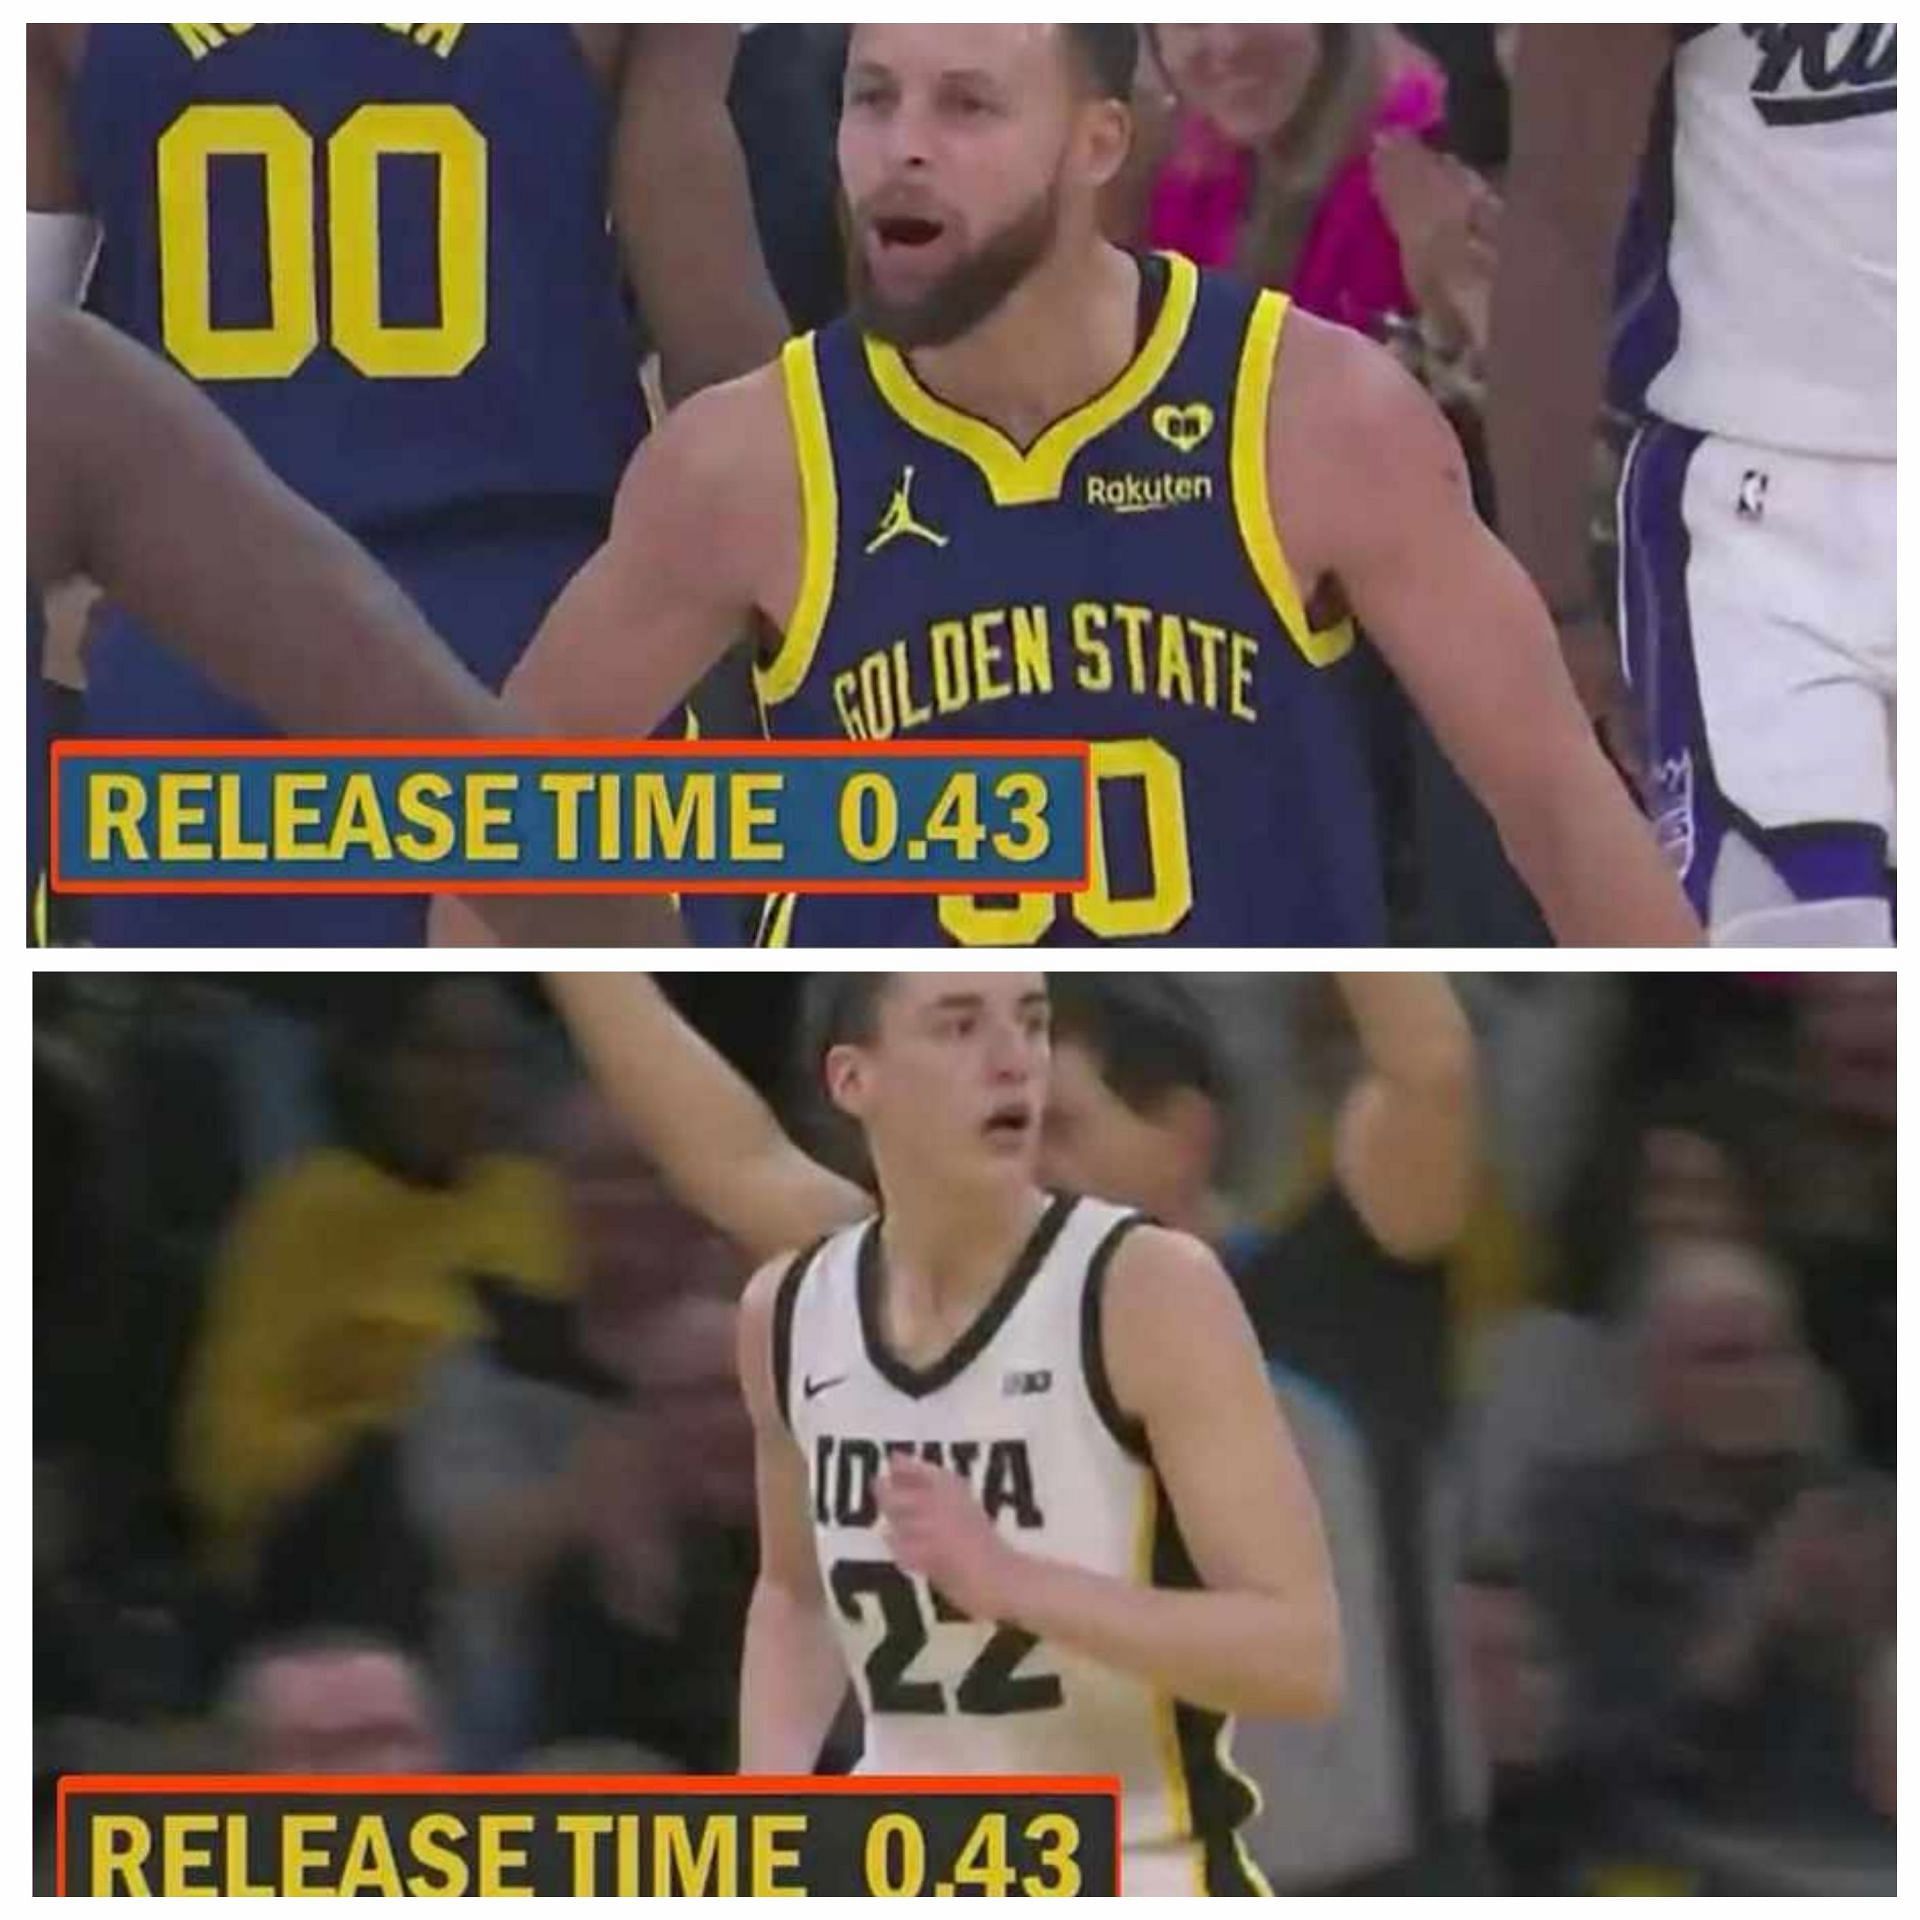 It appears that Steph Curry (up) and Caitlin Clark (down) have identical release time in shooting